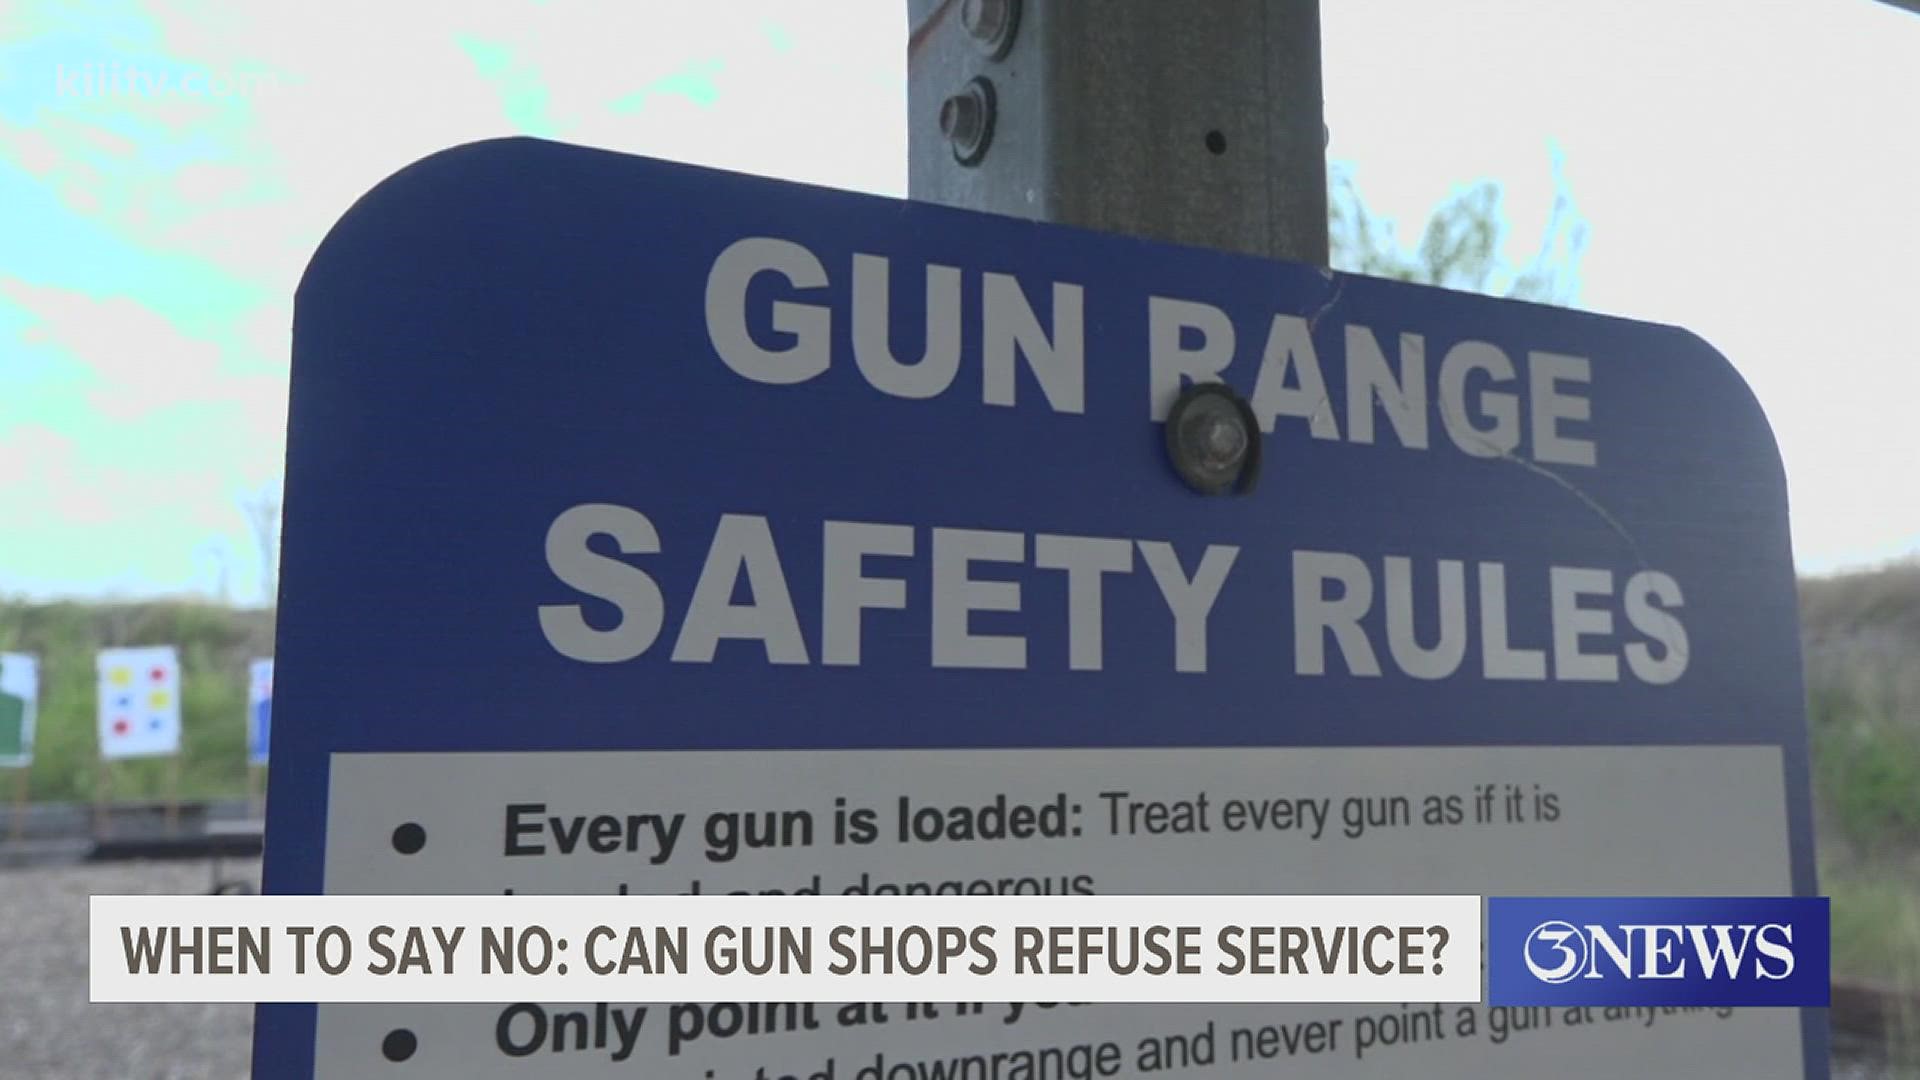 Even if the customer passes the screening and can buy the firearm, the shop owner can still decline service.